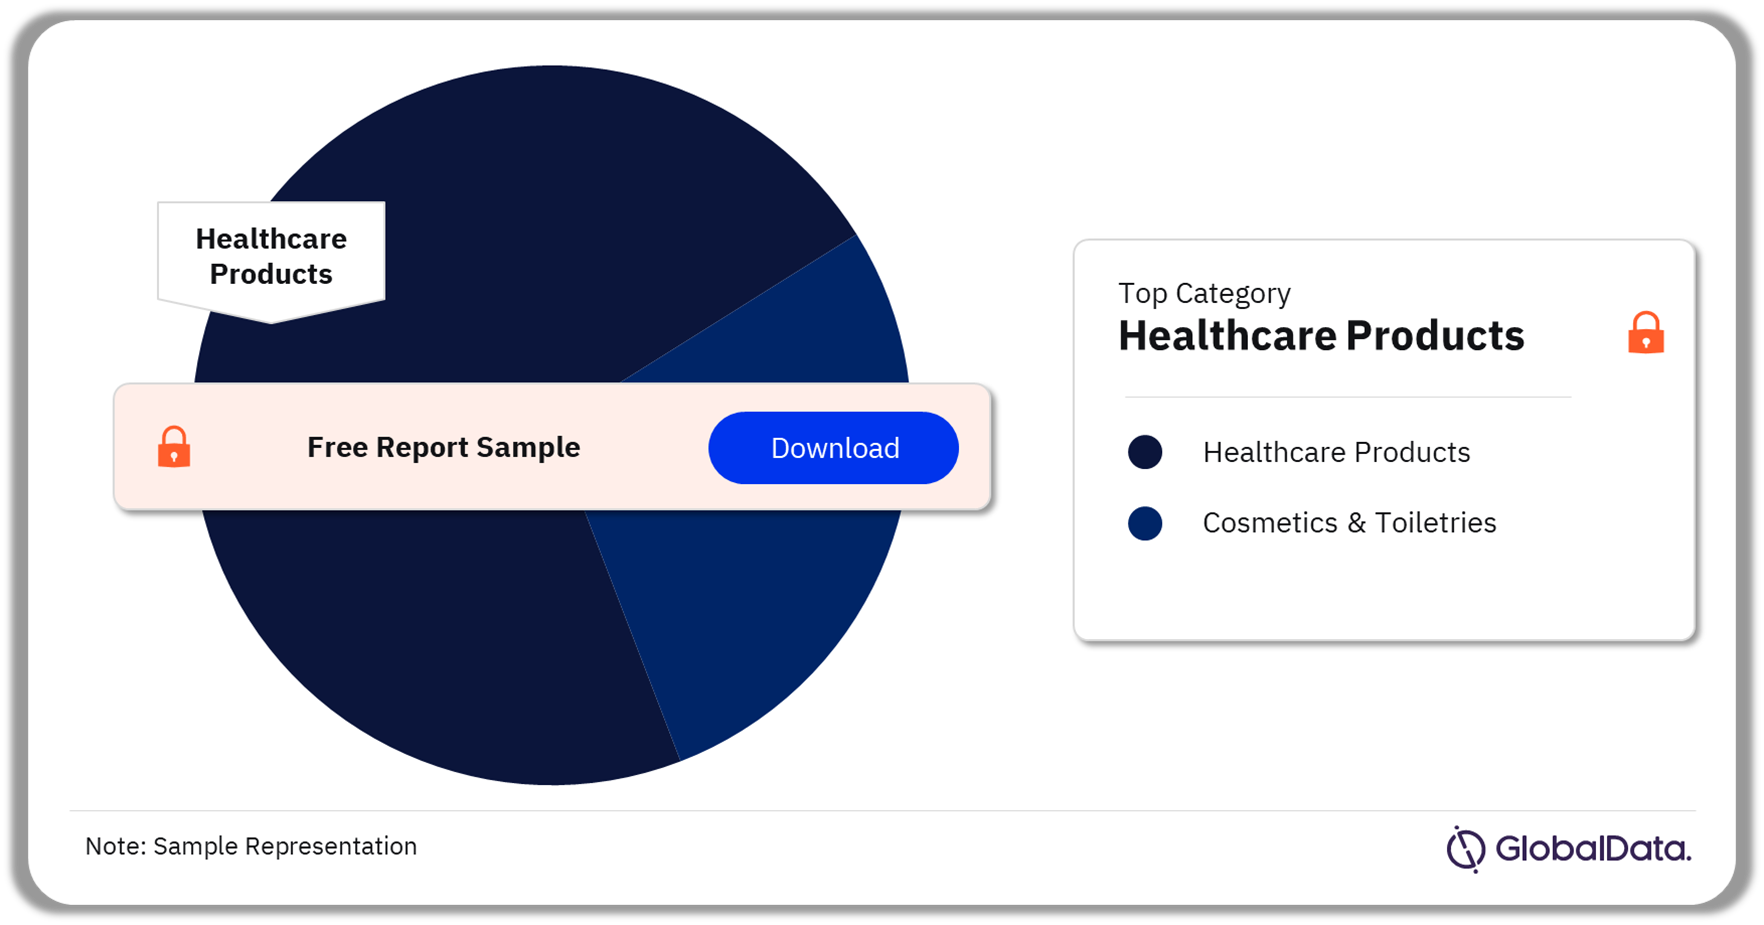 Americas Health and Beauty Sector Analysis by Categories, 2022 (%)